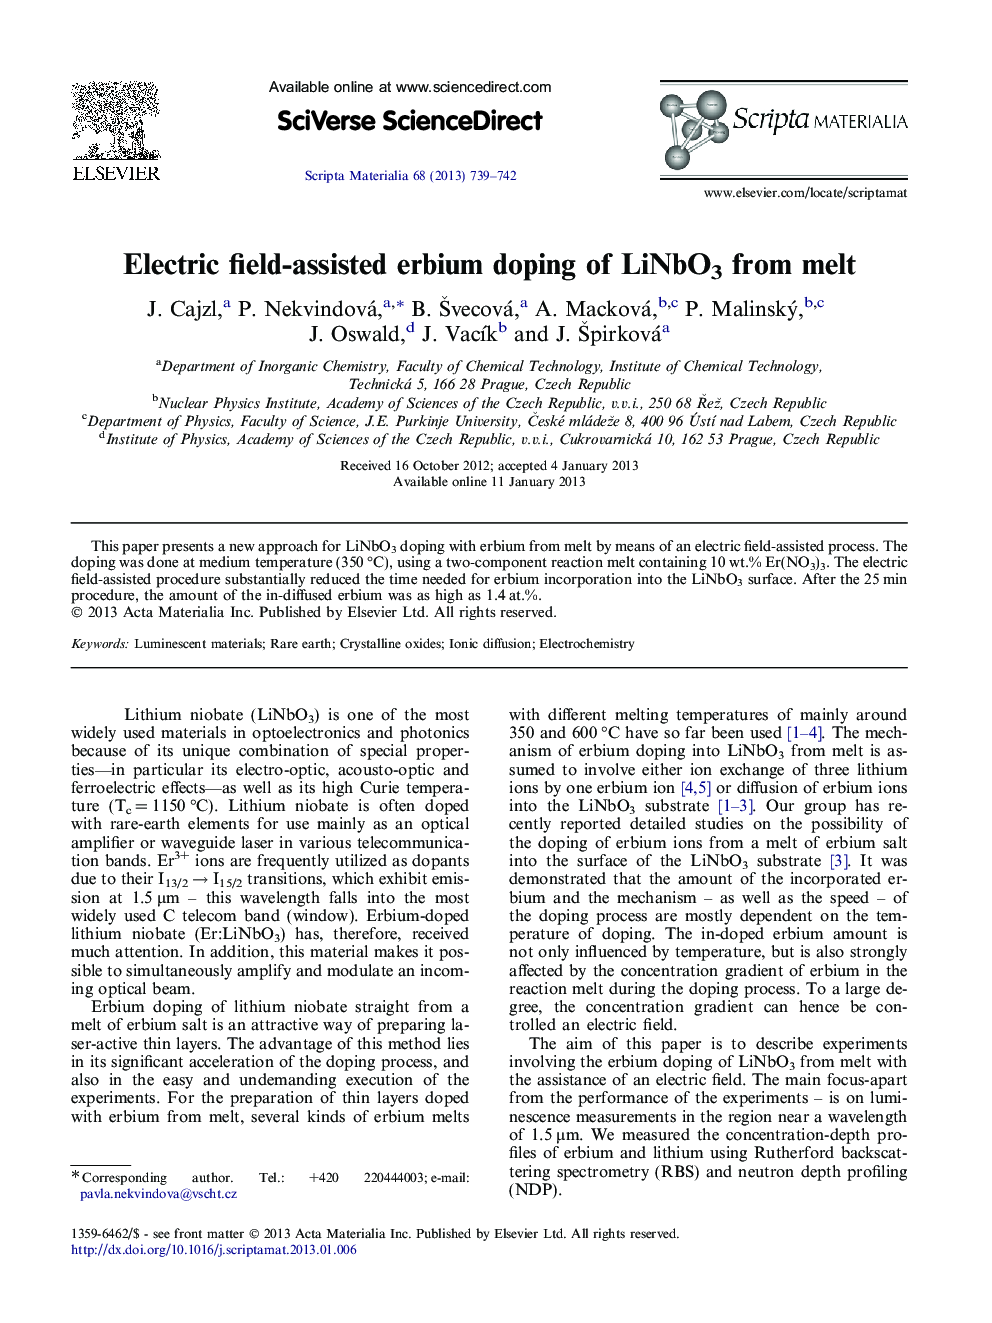 Electric field-assisted erbium doping of LiNbO3 from melt